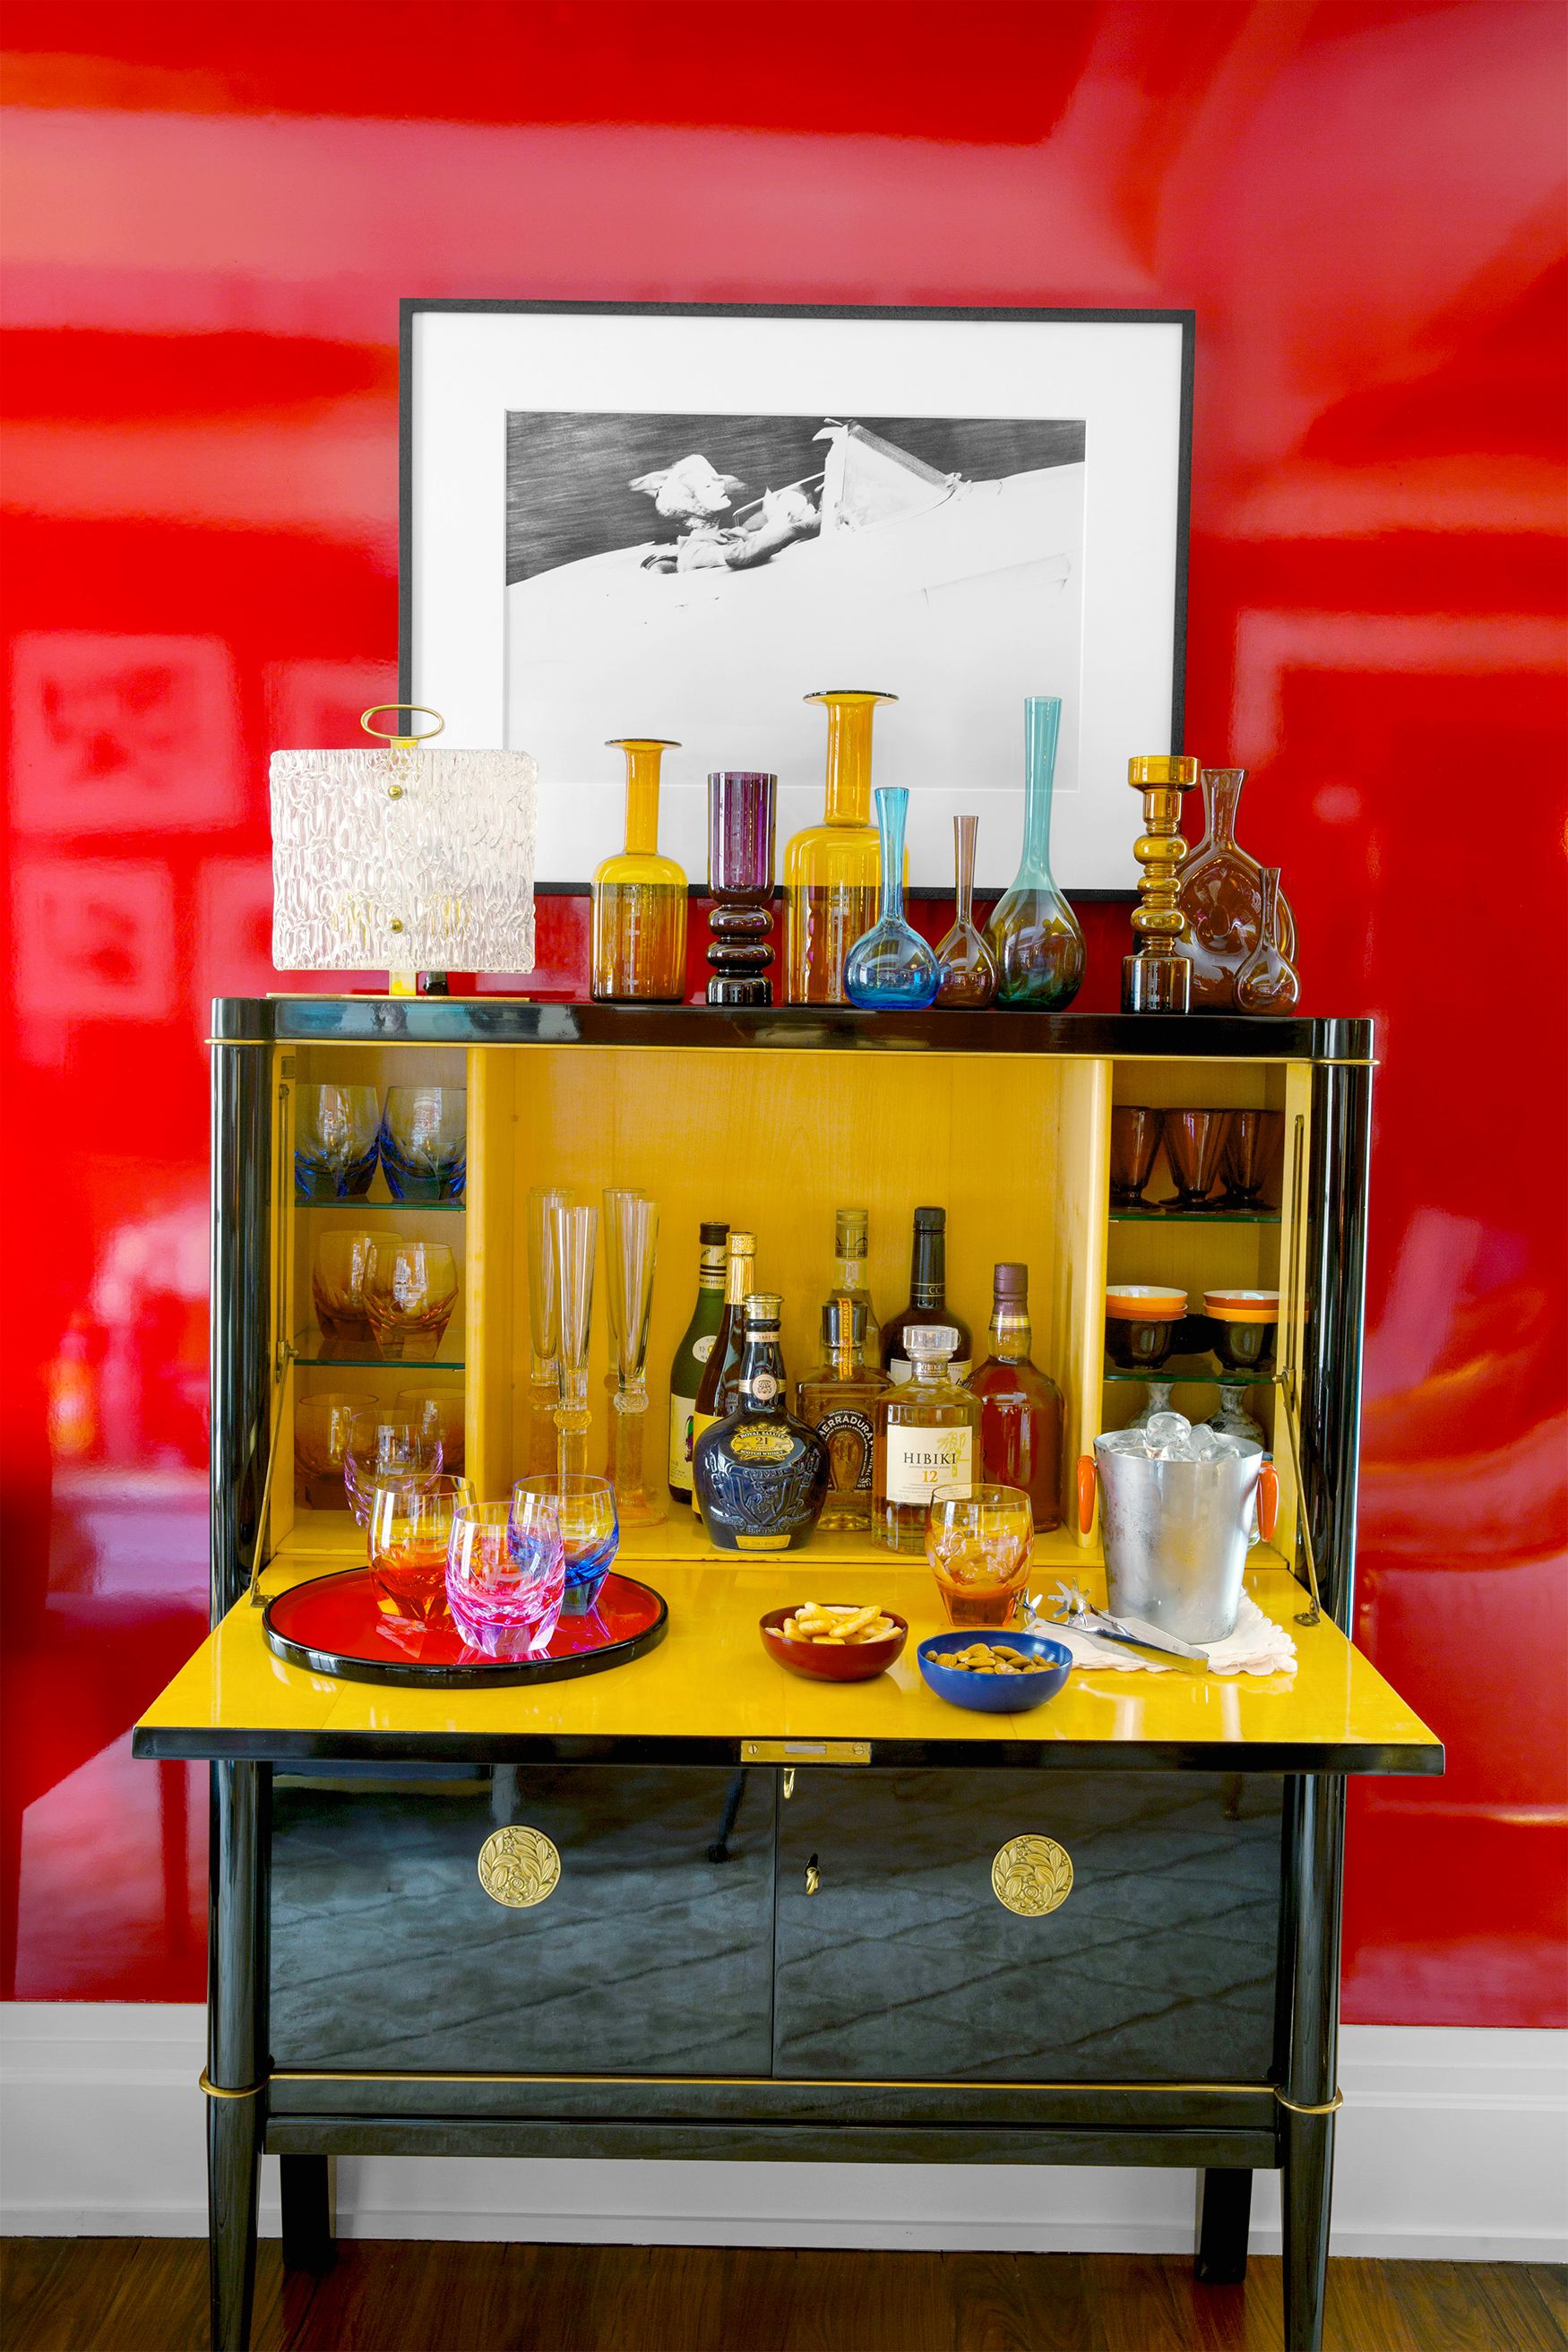 Create Your Own Mini Bar at Home